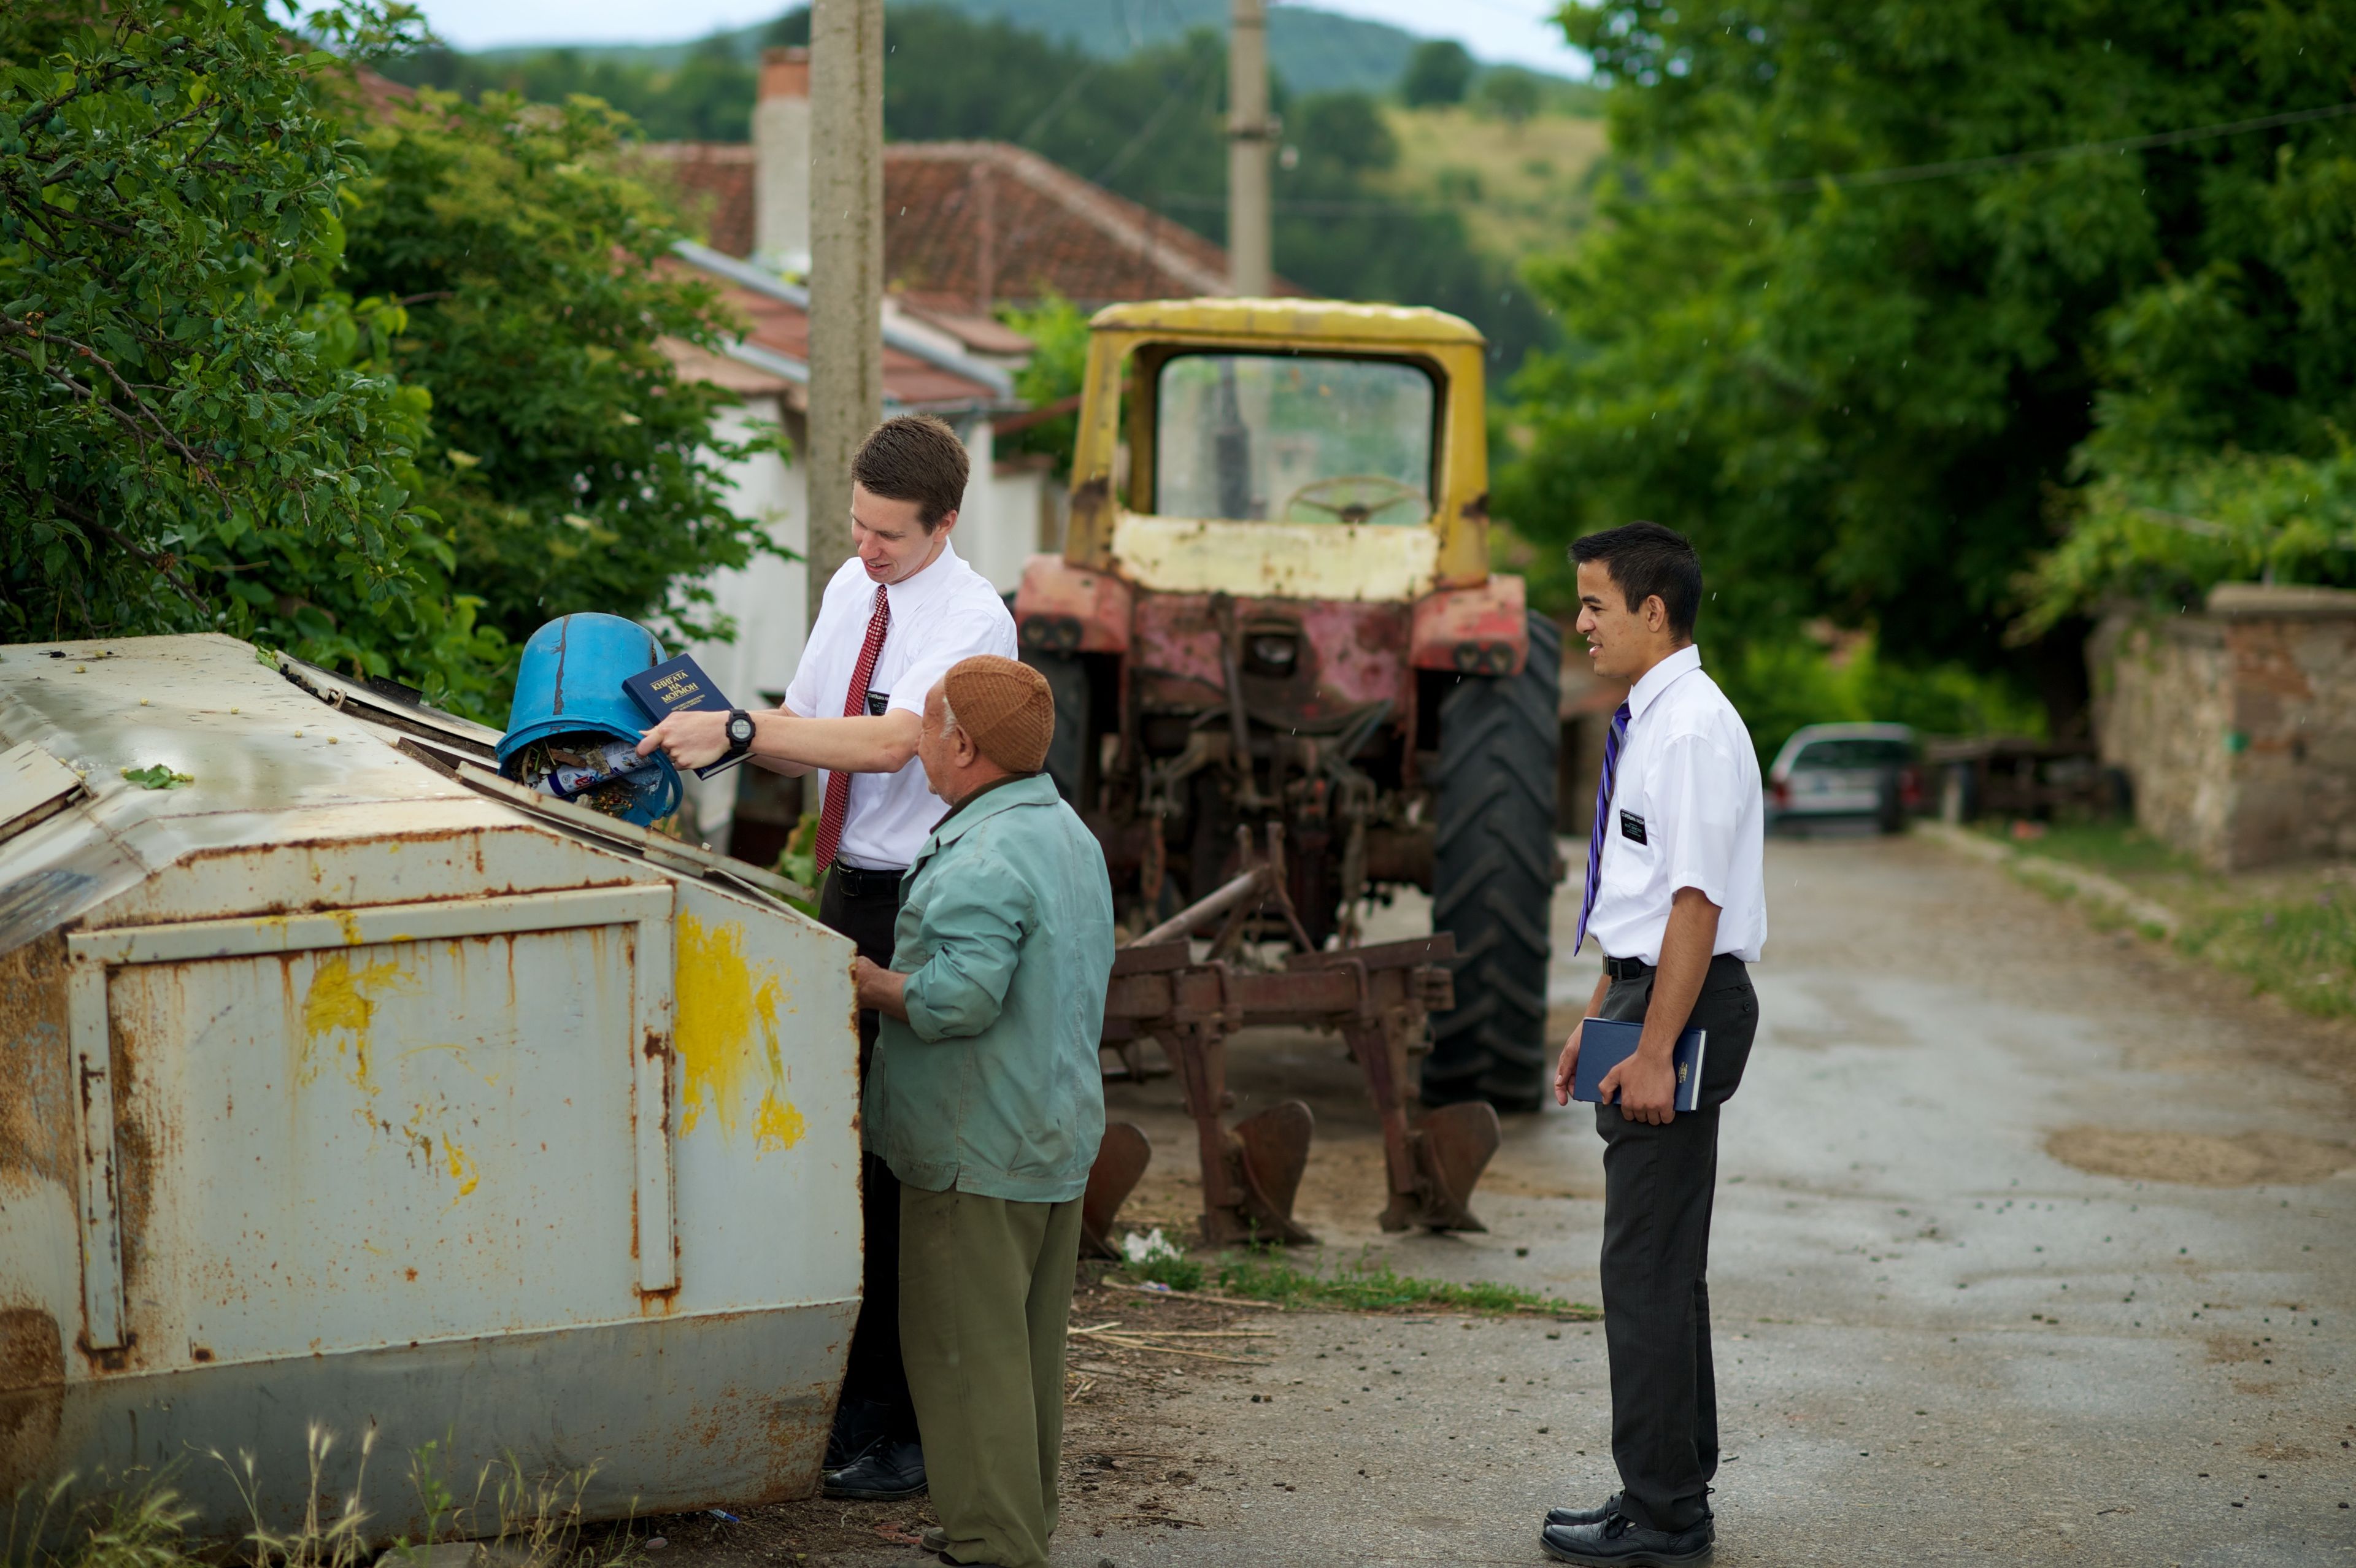 Two missionaries help an elderly woman take her trash to the dumpster down the street.